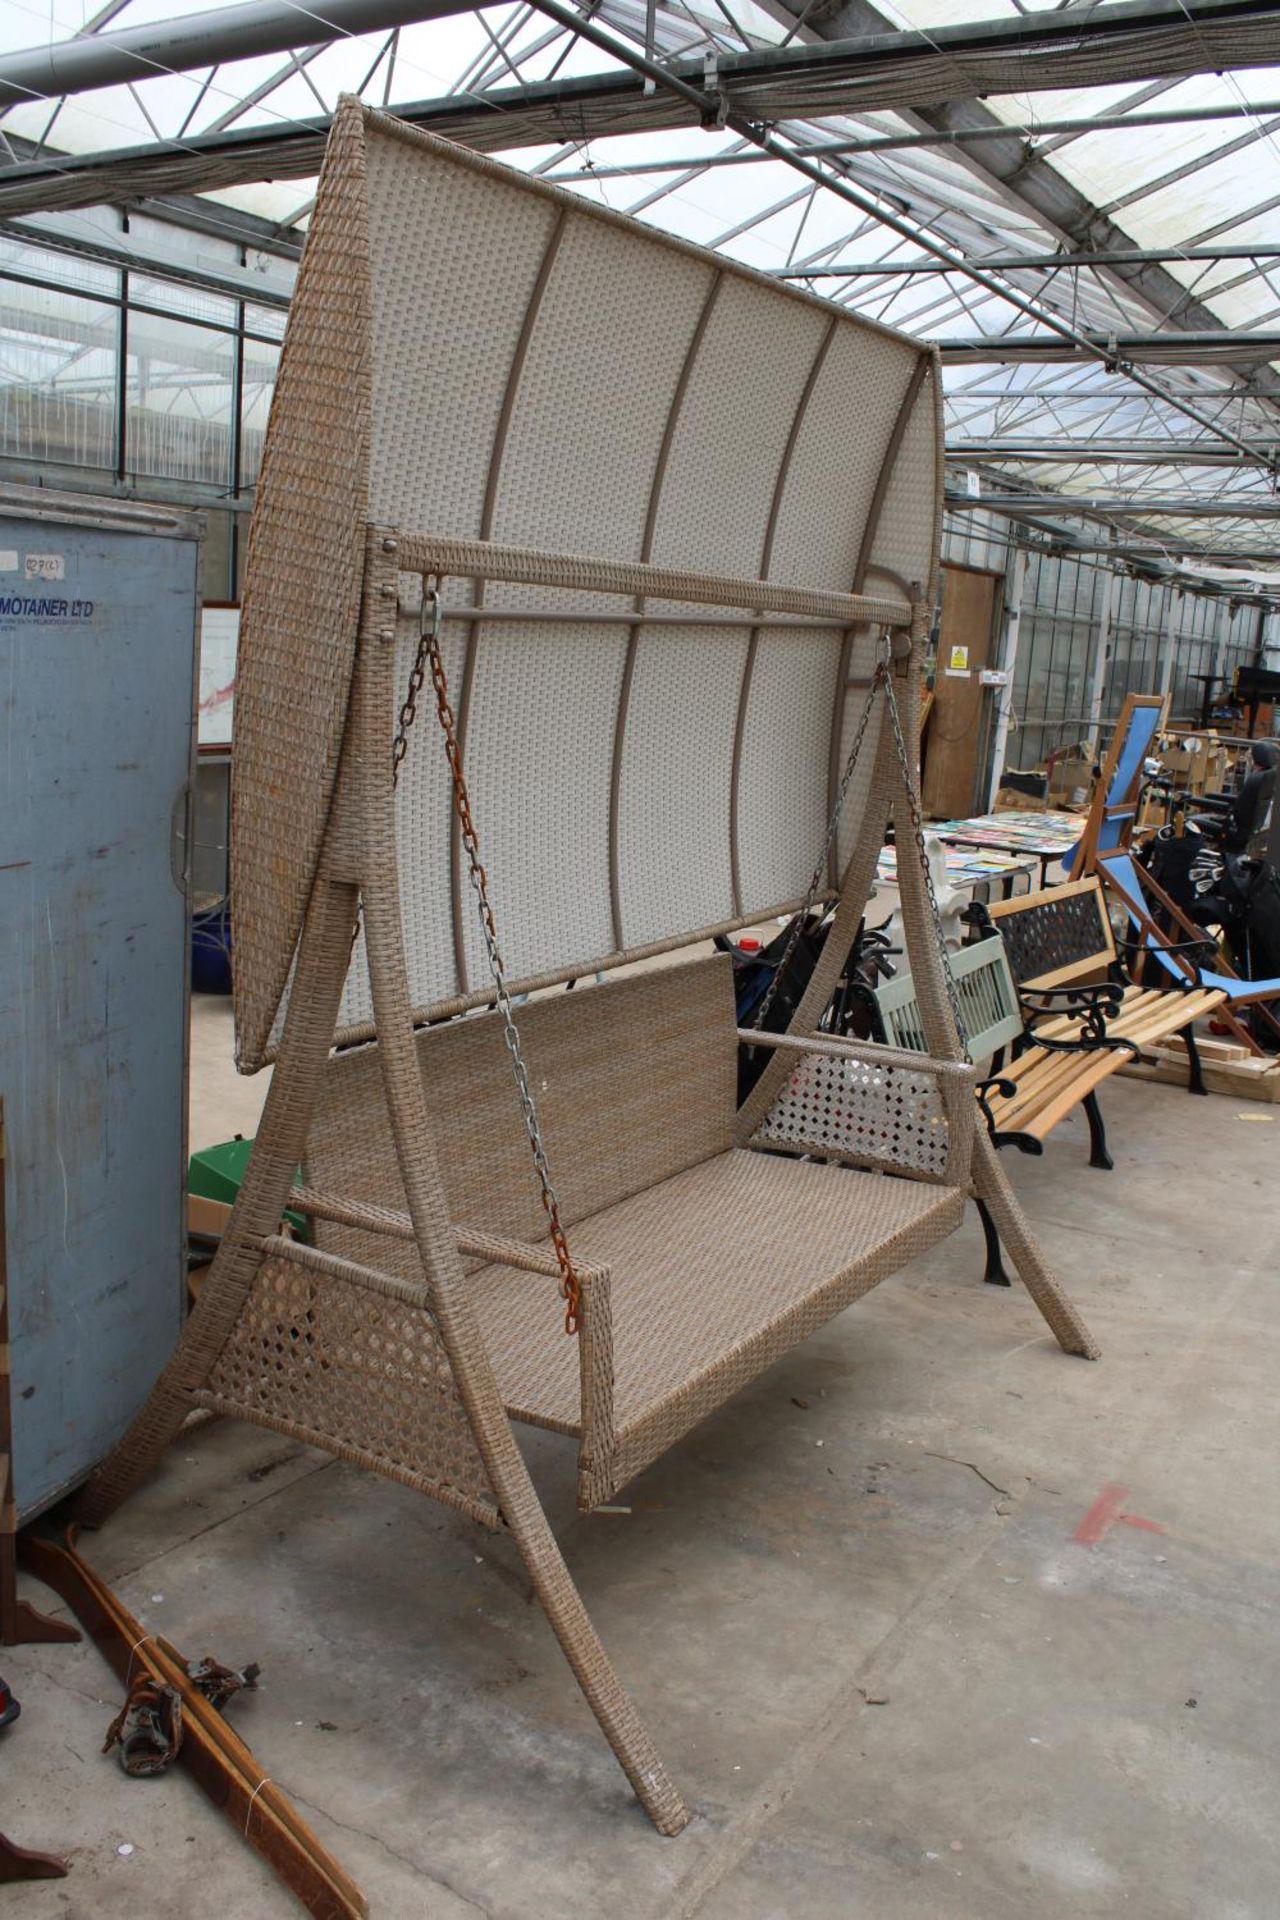 A LARGE THREE SEATER RATTAN SWING SEAT WITH CANOPY - Image 2 of 4